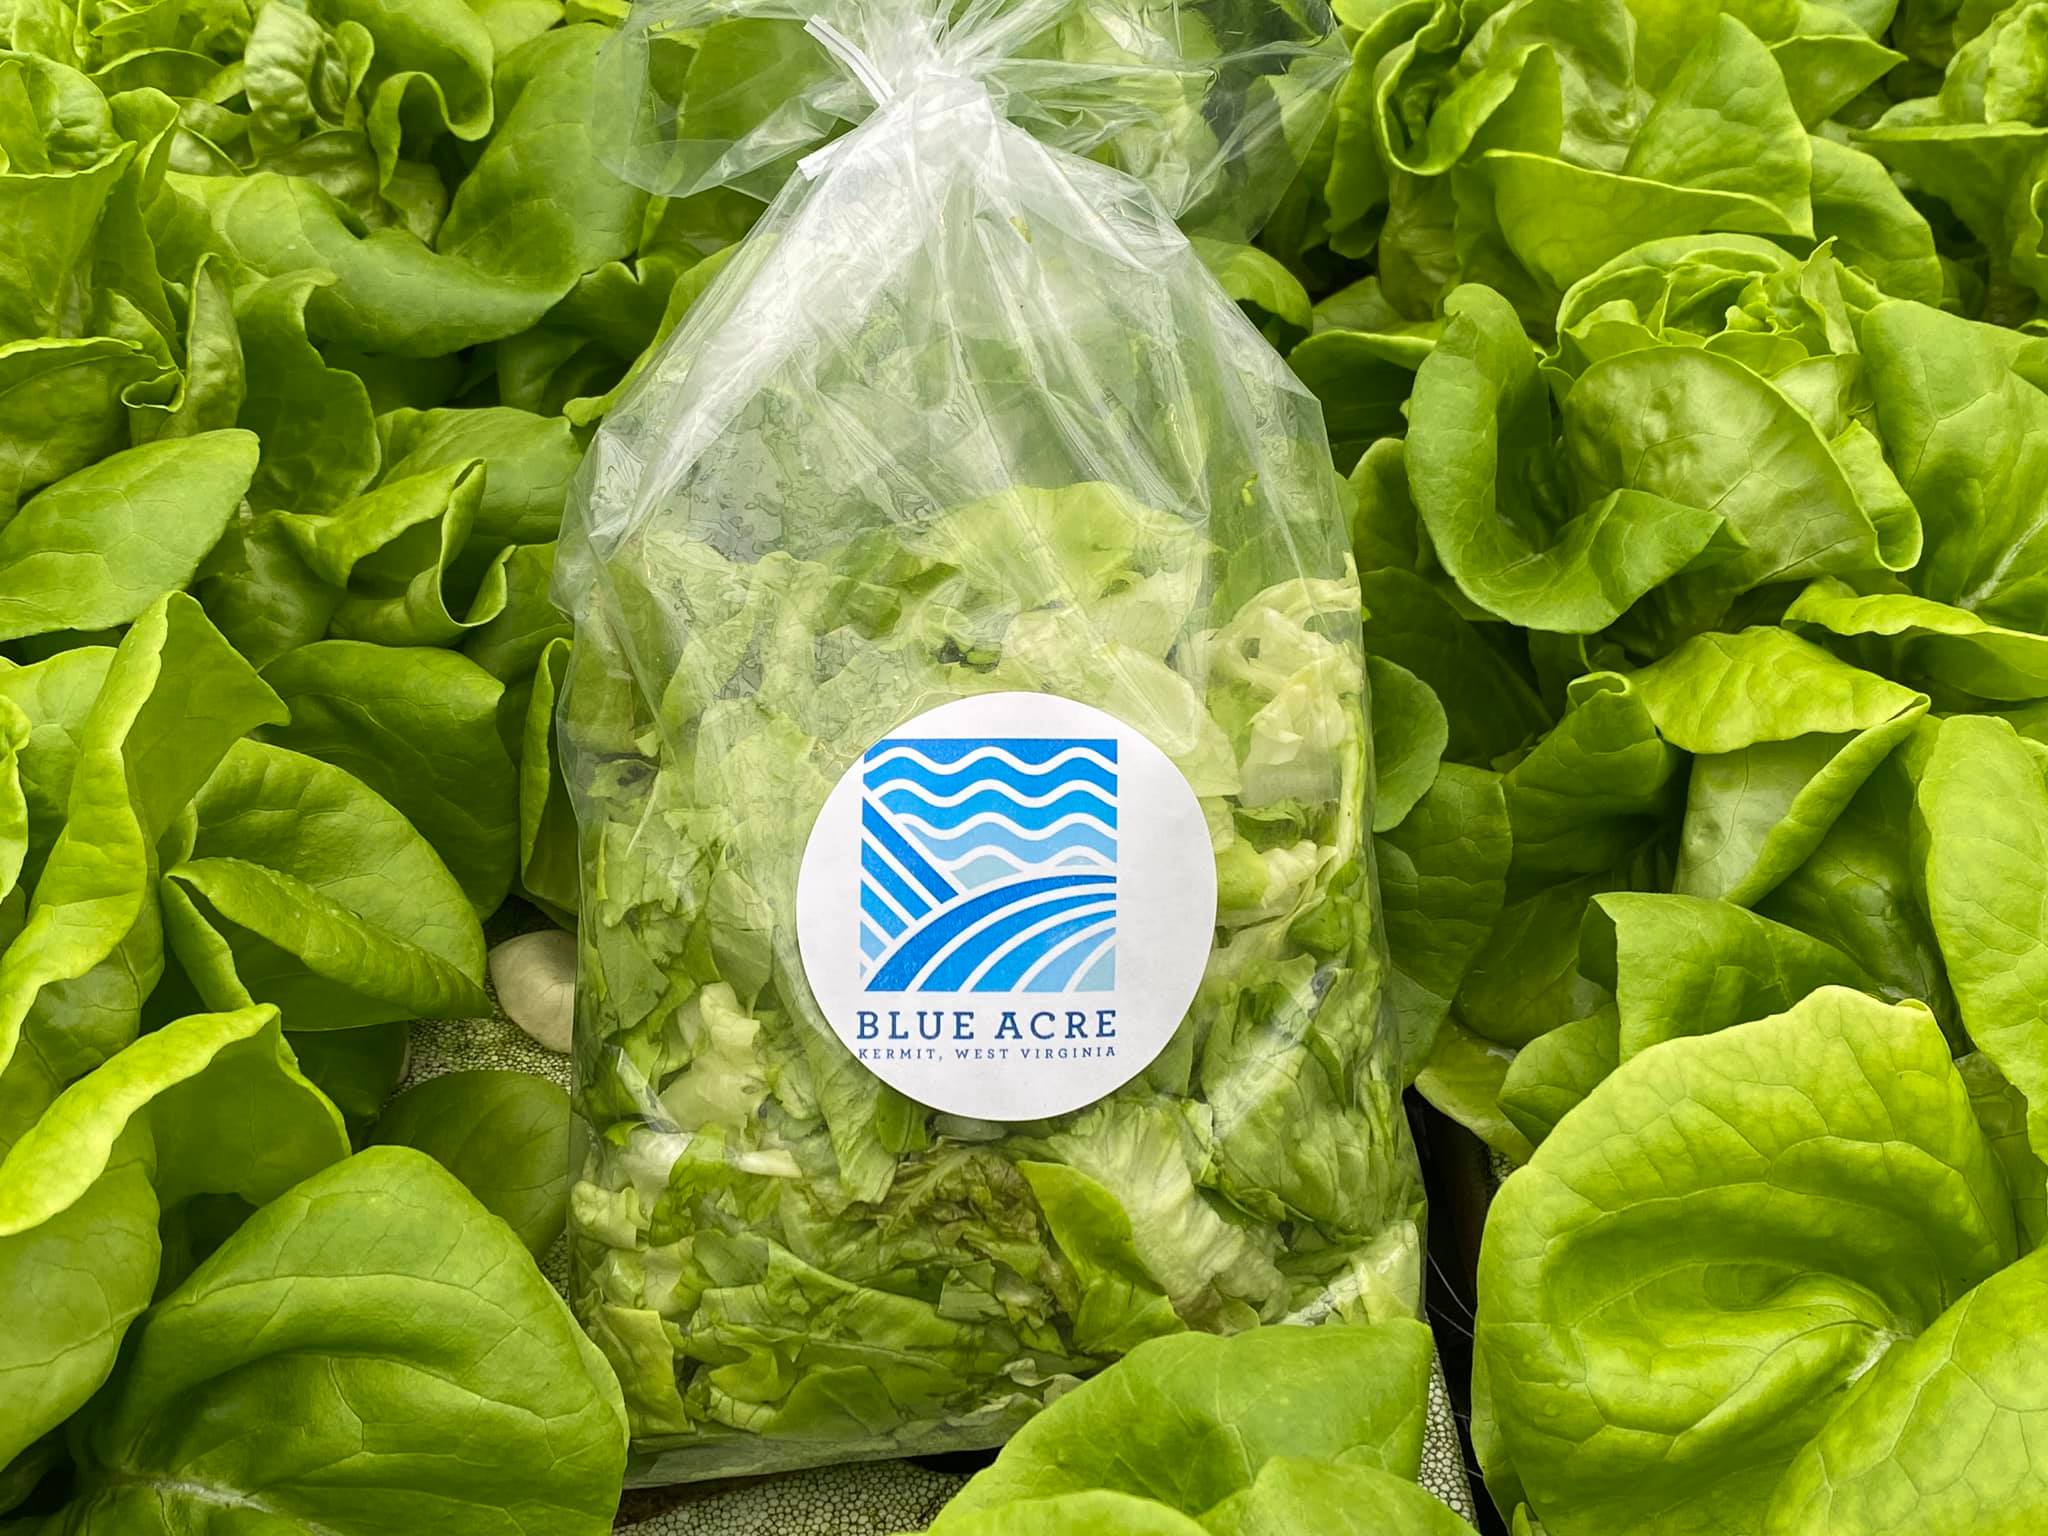 Blue Acre offers locally grown greens and fish